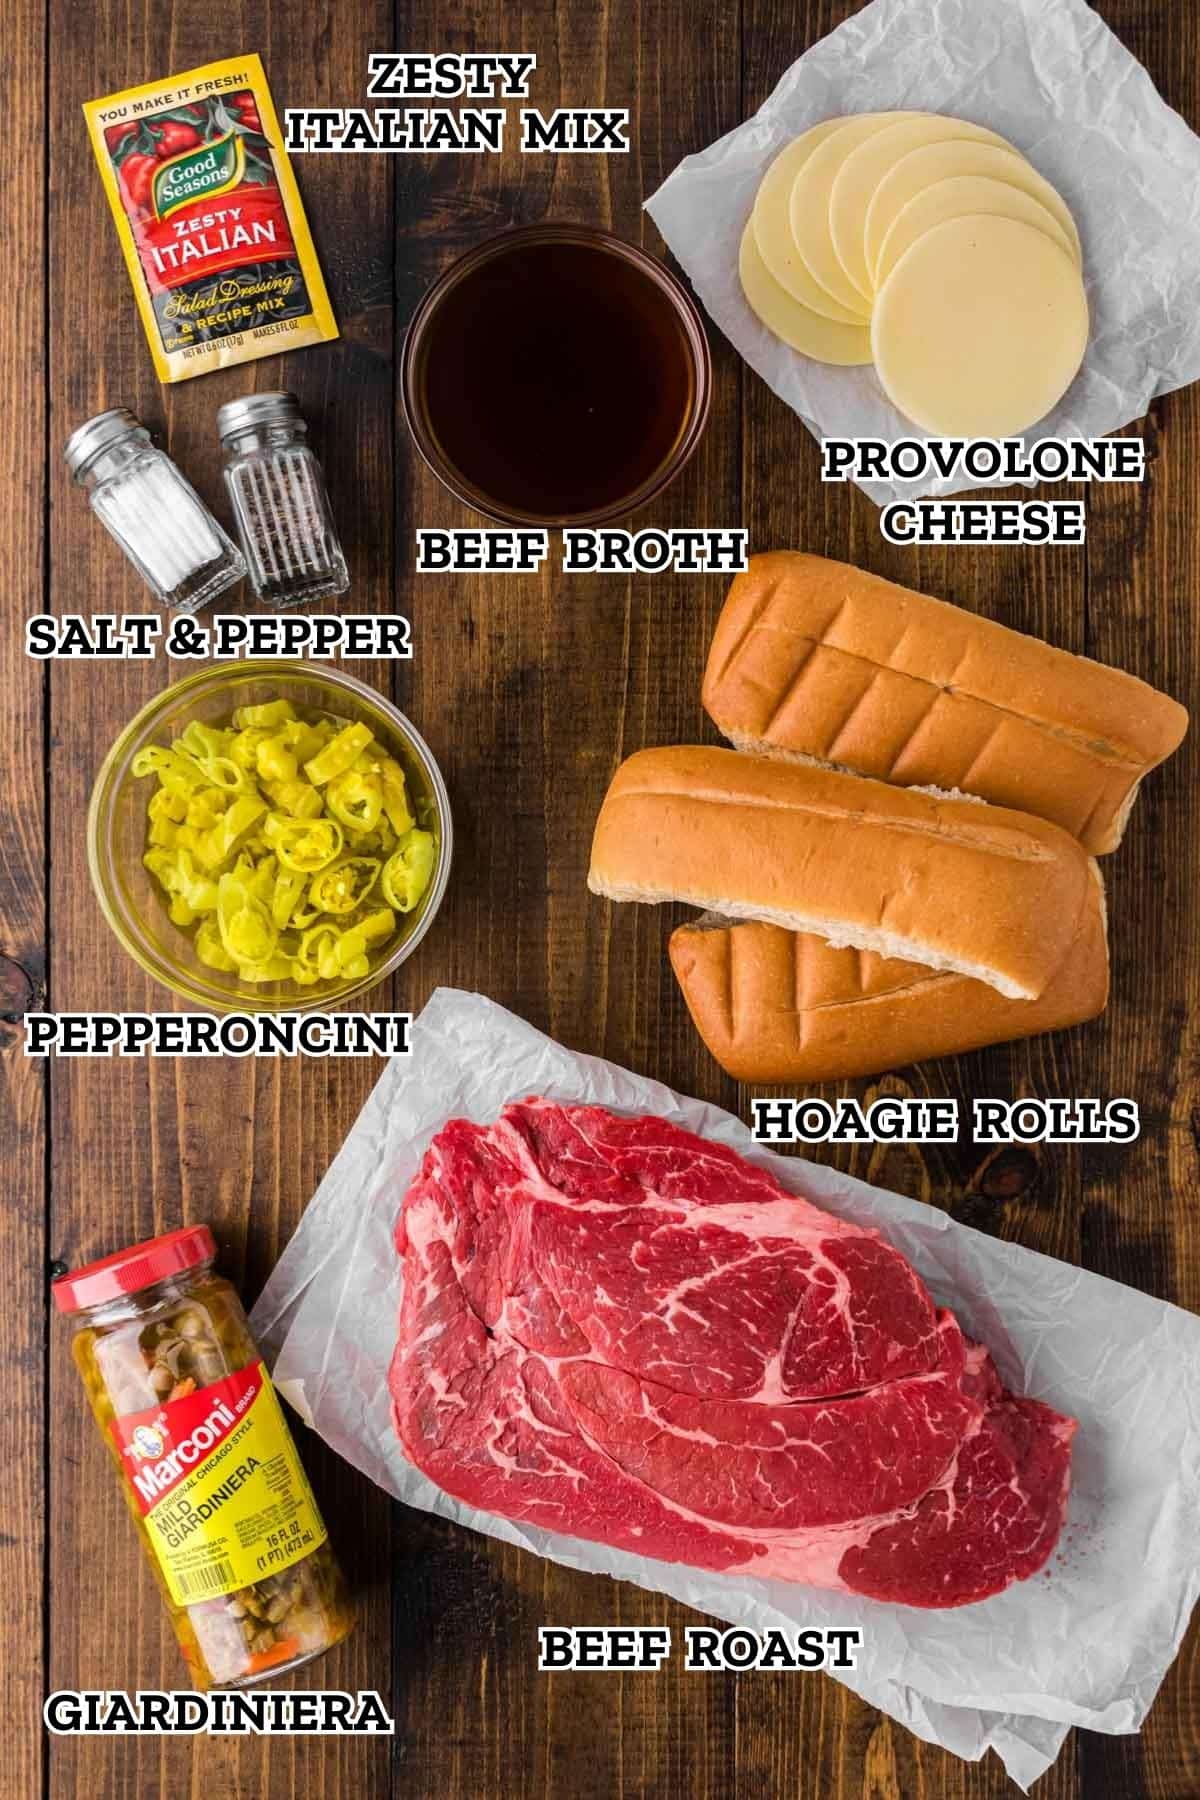 A labeled image of ingredients needed to make Italian Beef Recipe